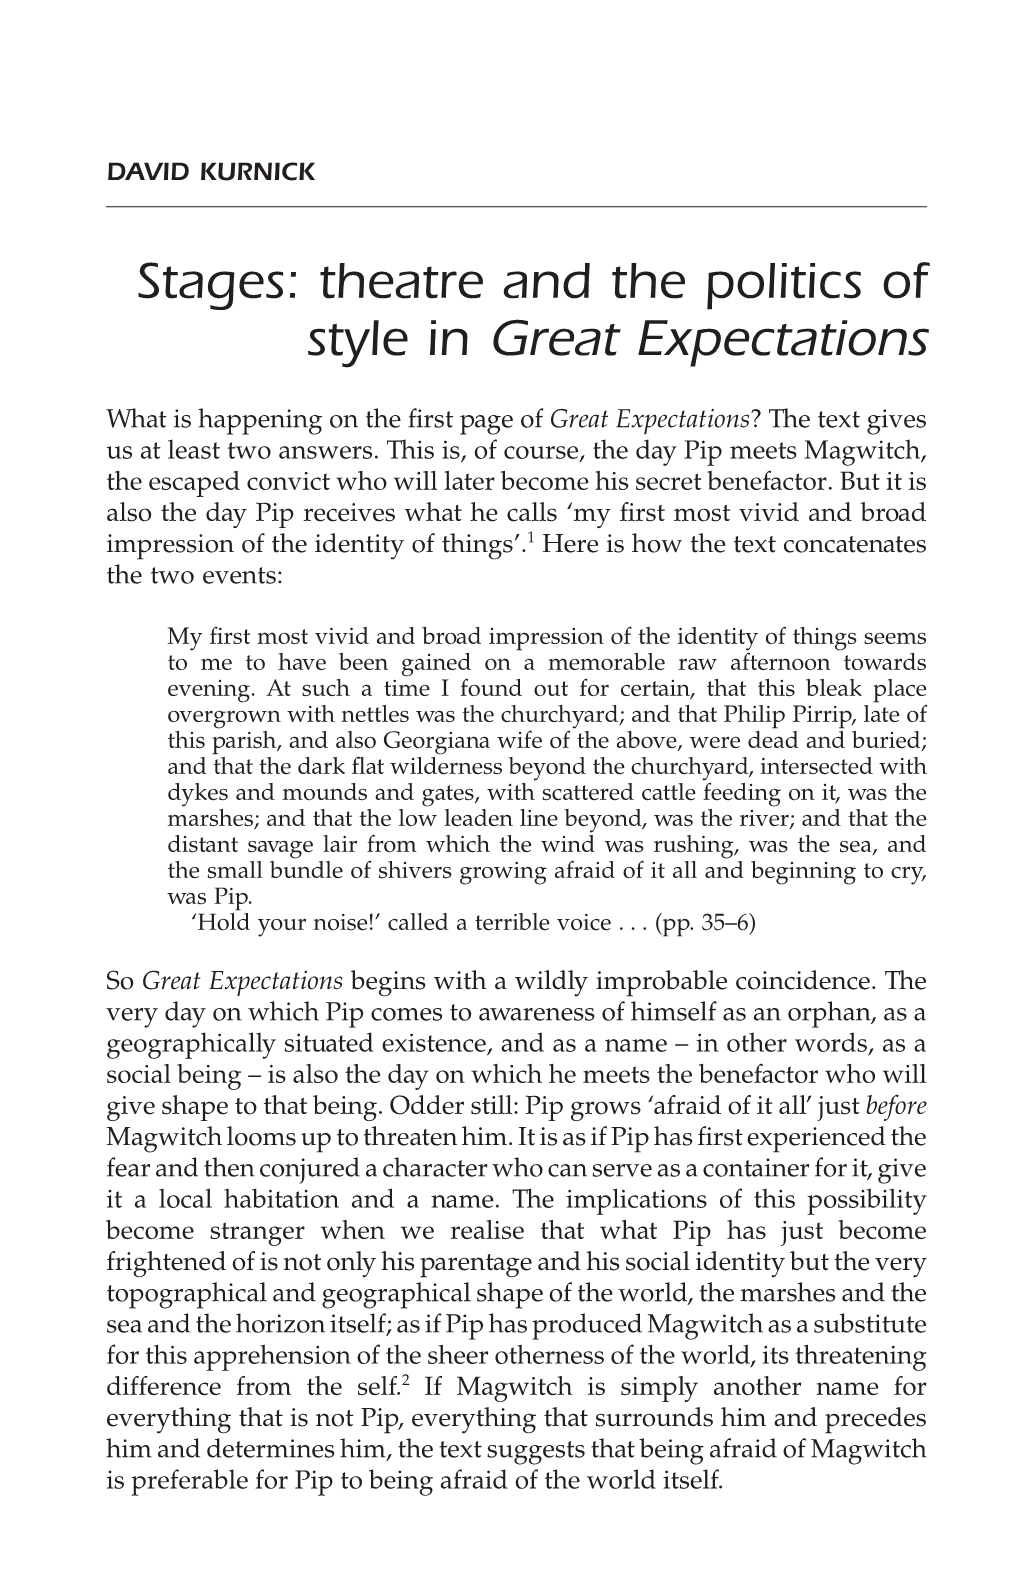 Theatre and the Politics of Style in Great Expectations